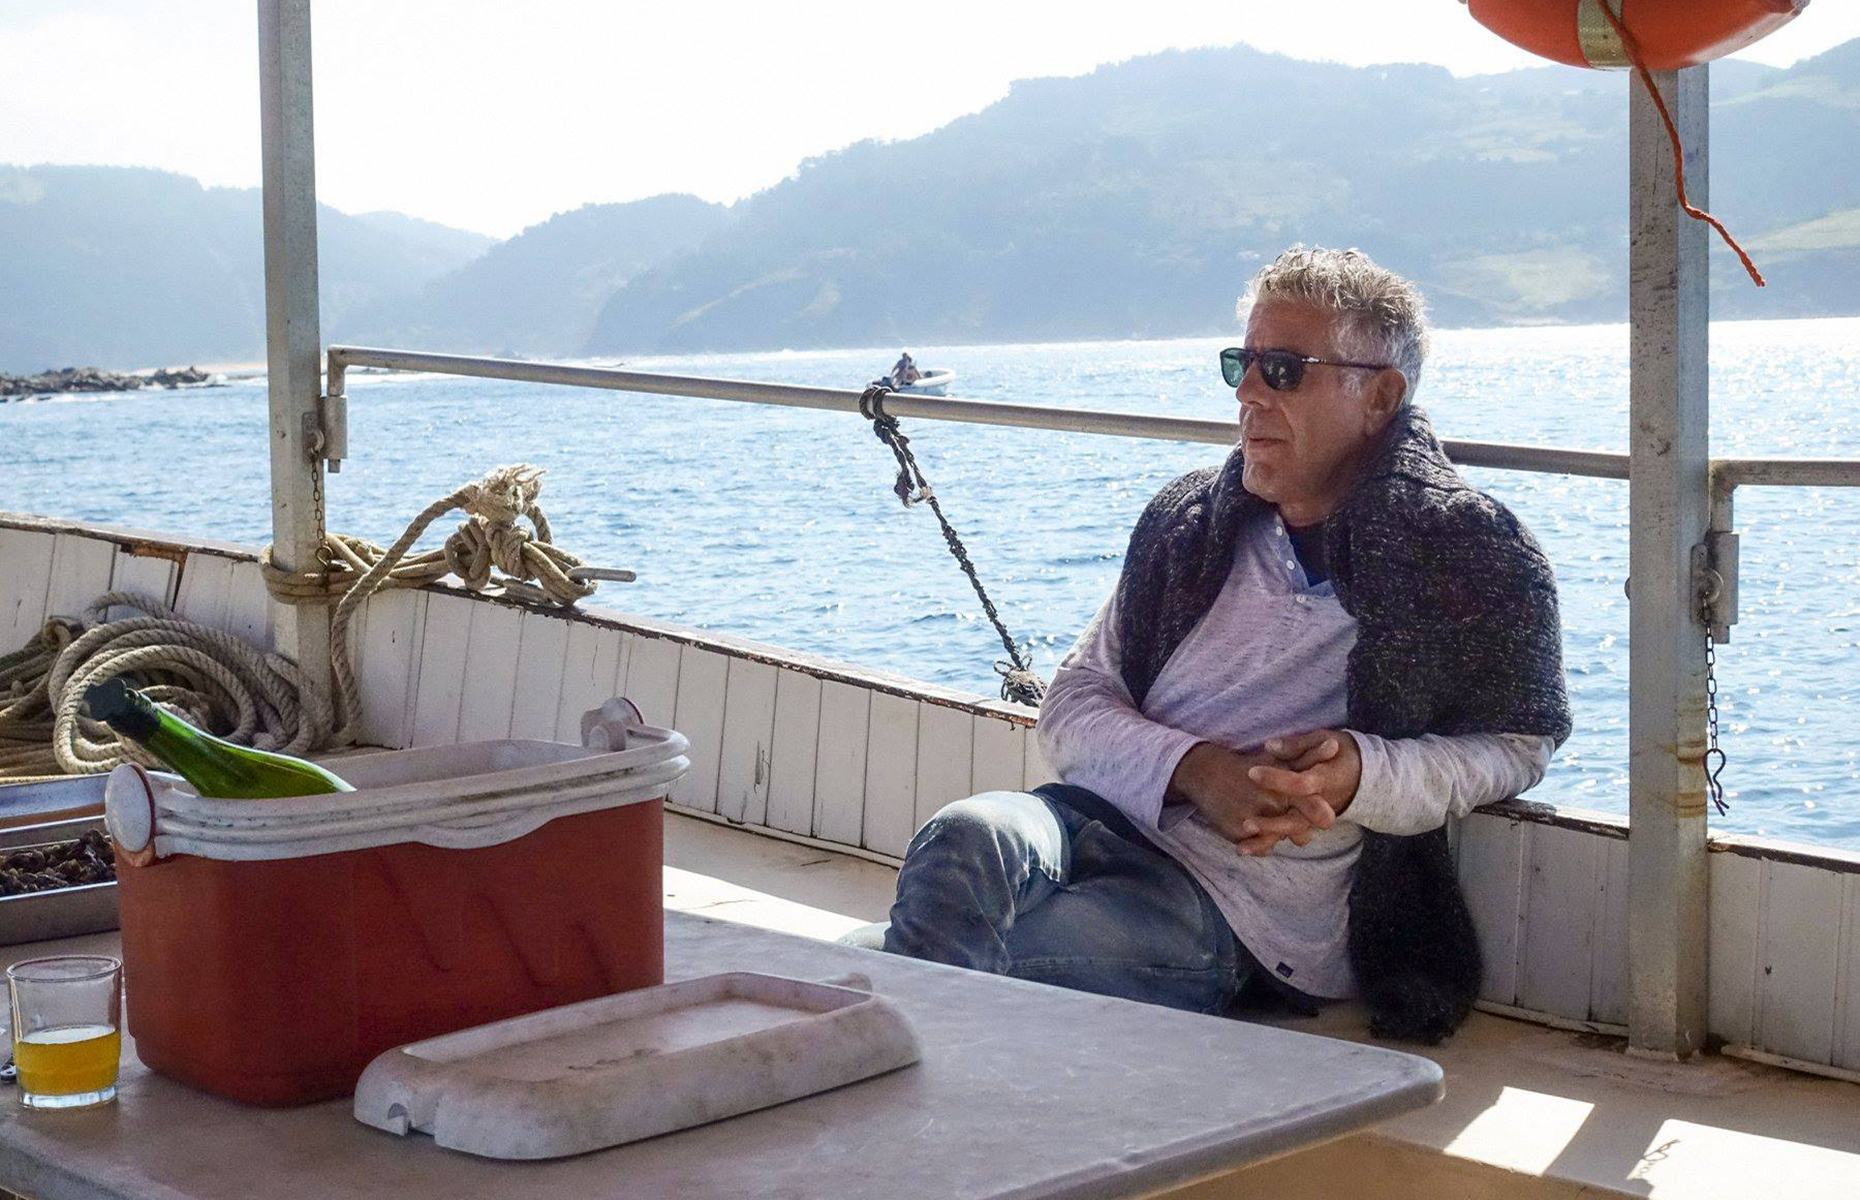 Anthony Bourdain in Parts Unknown (Image: Anthony Bourdain: Parts Unknown/Facebook)